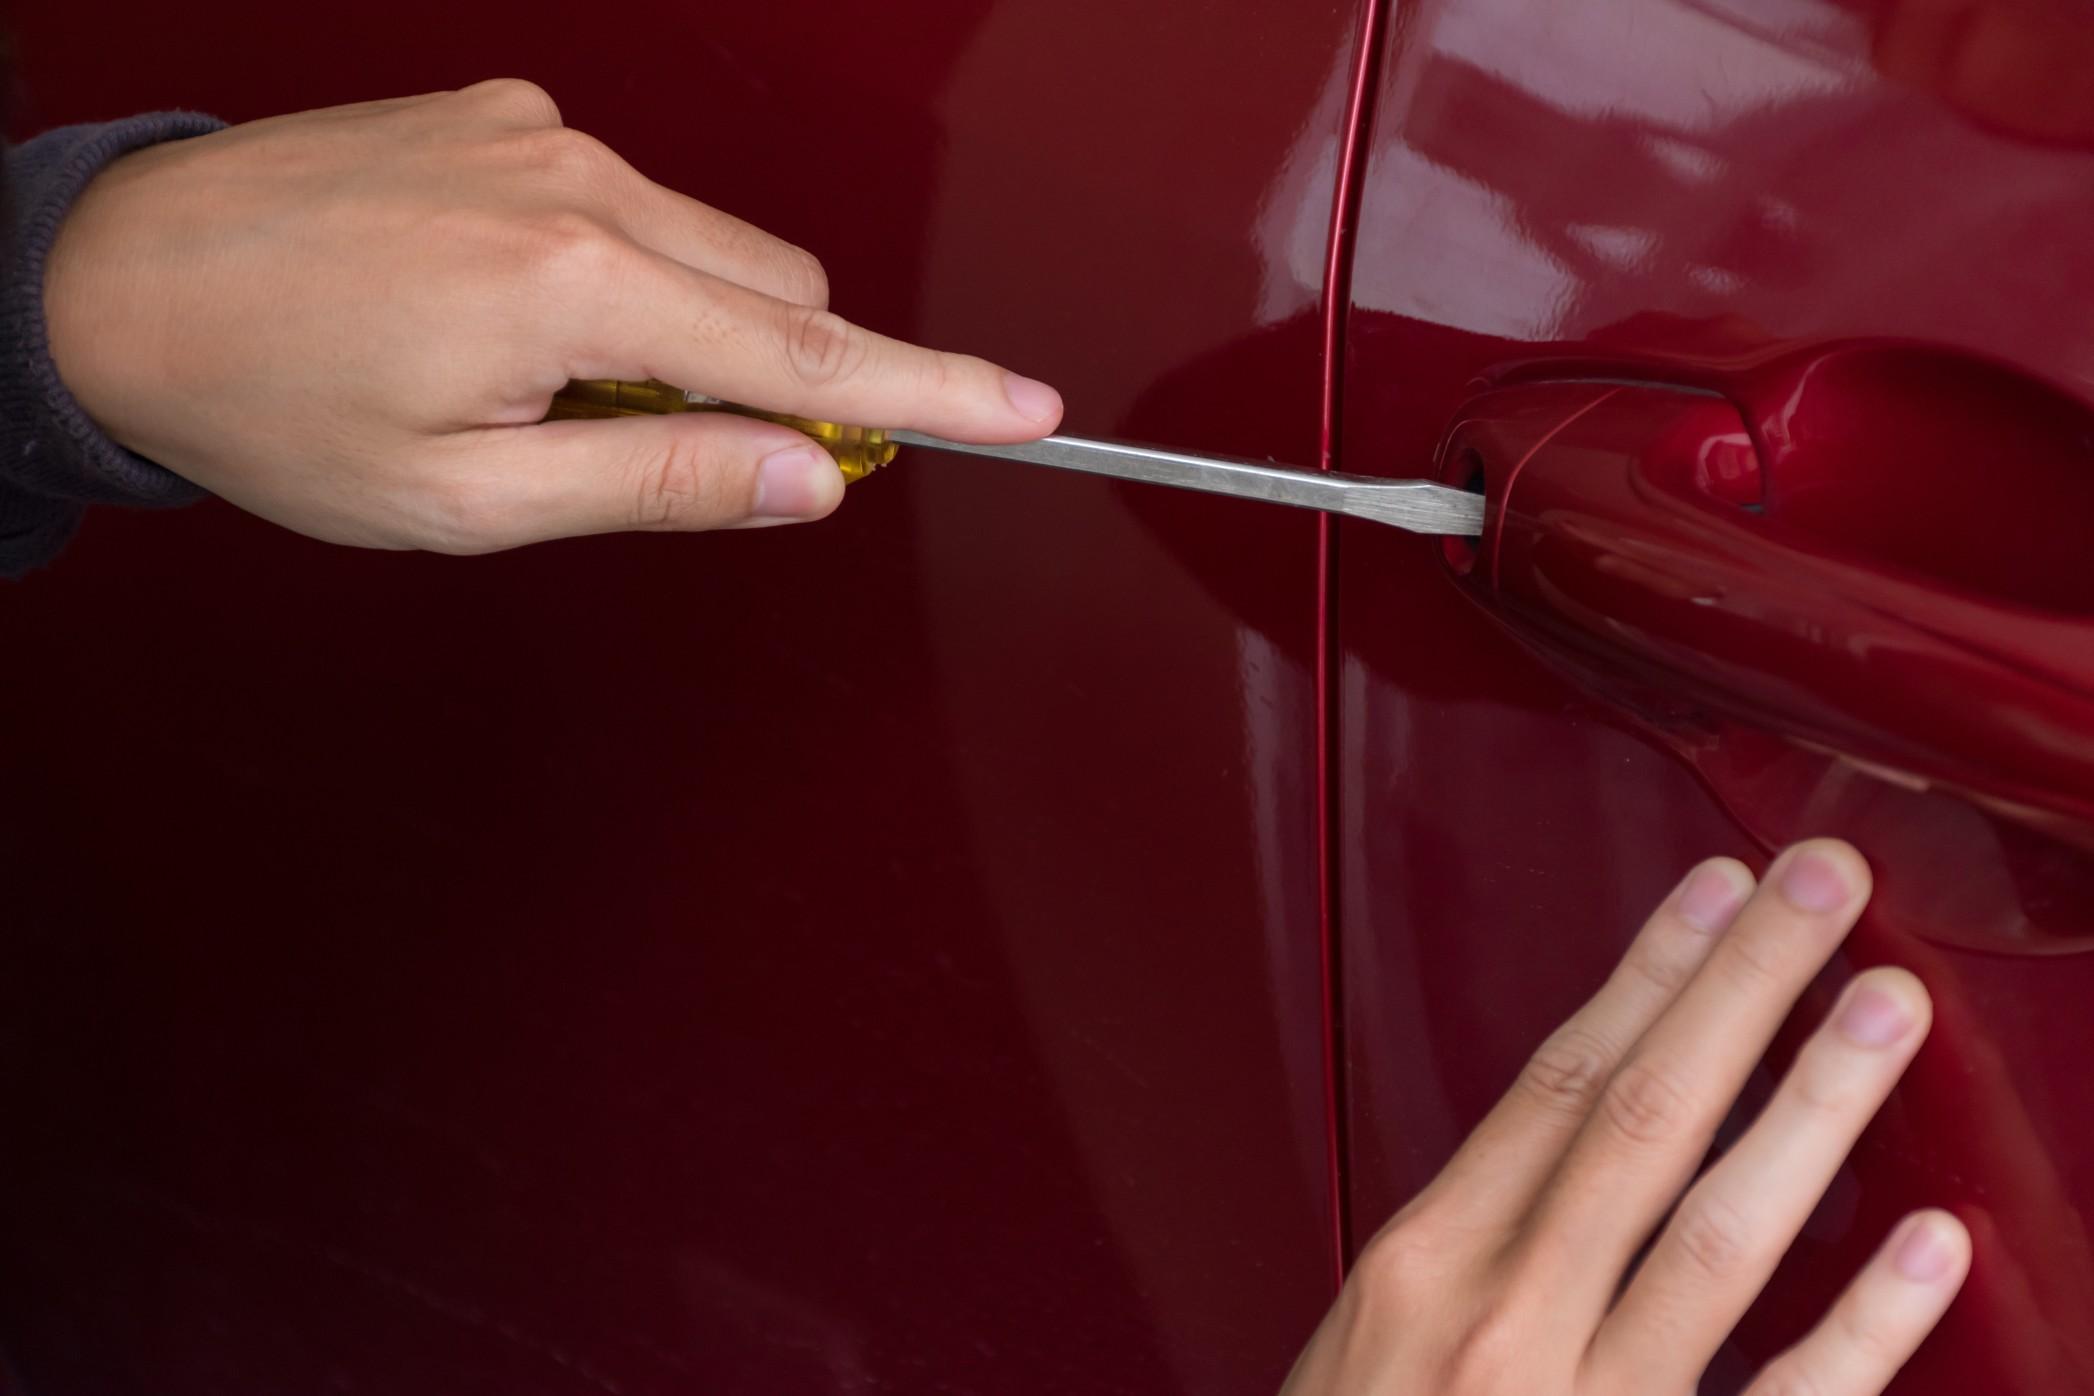 There are several easy ways to deter car theft.